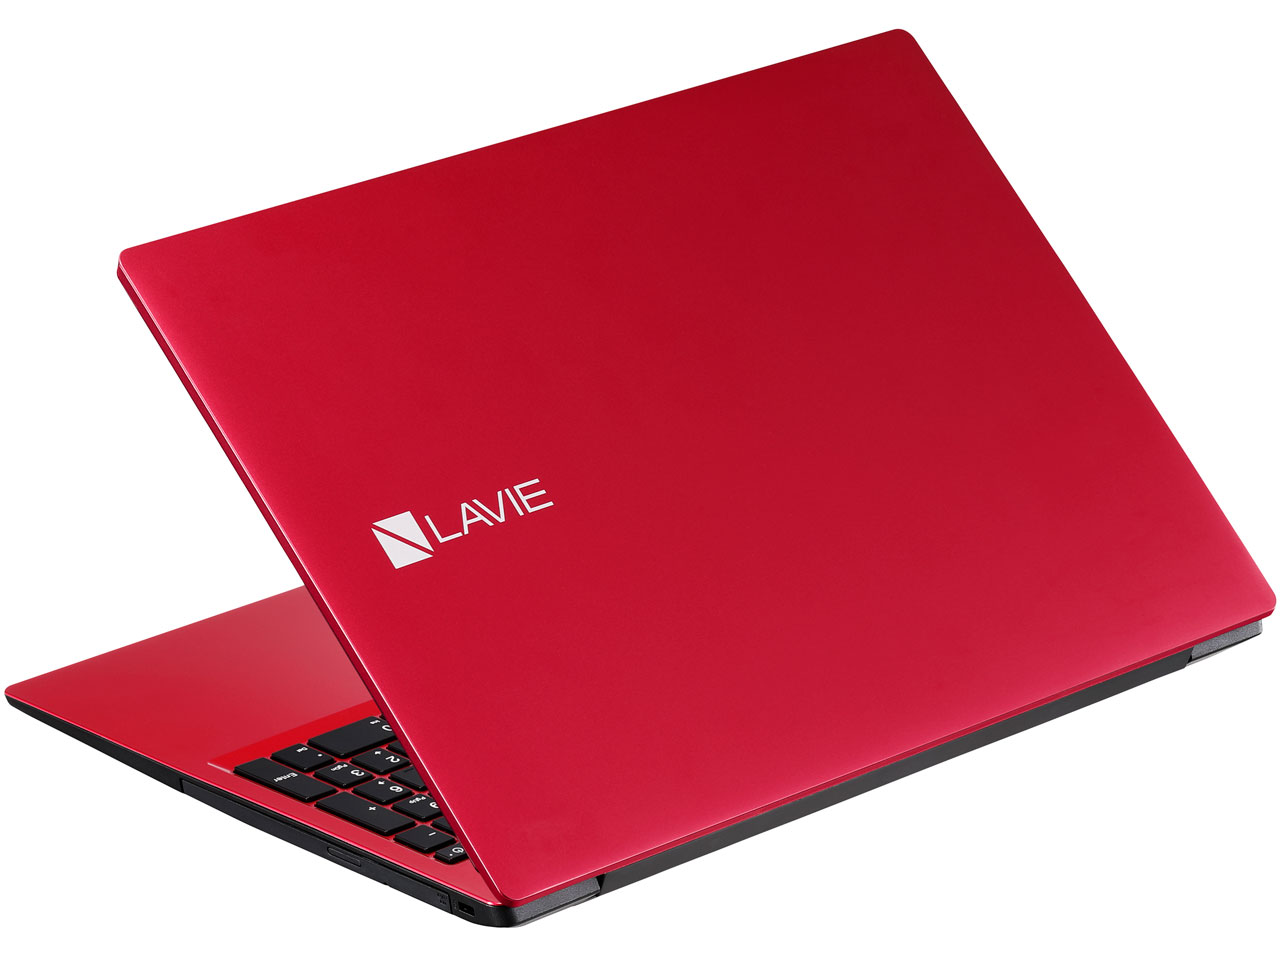 LAVIE Note Standard NS150/NAR PC-NS150NAR [カームレッド]の製品画像 